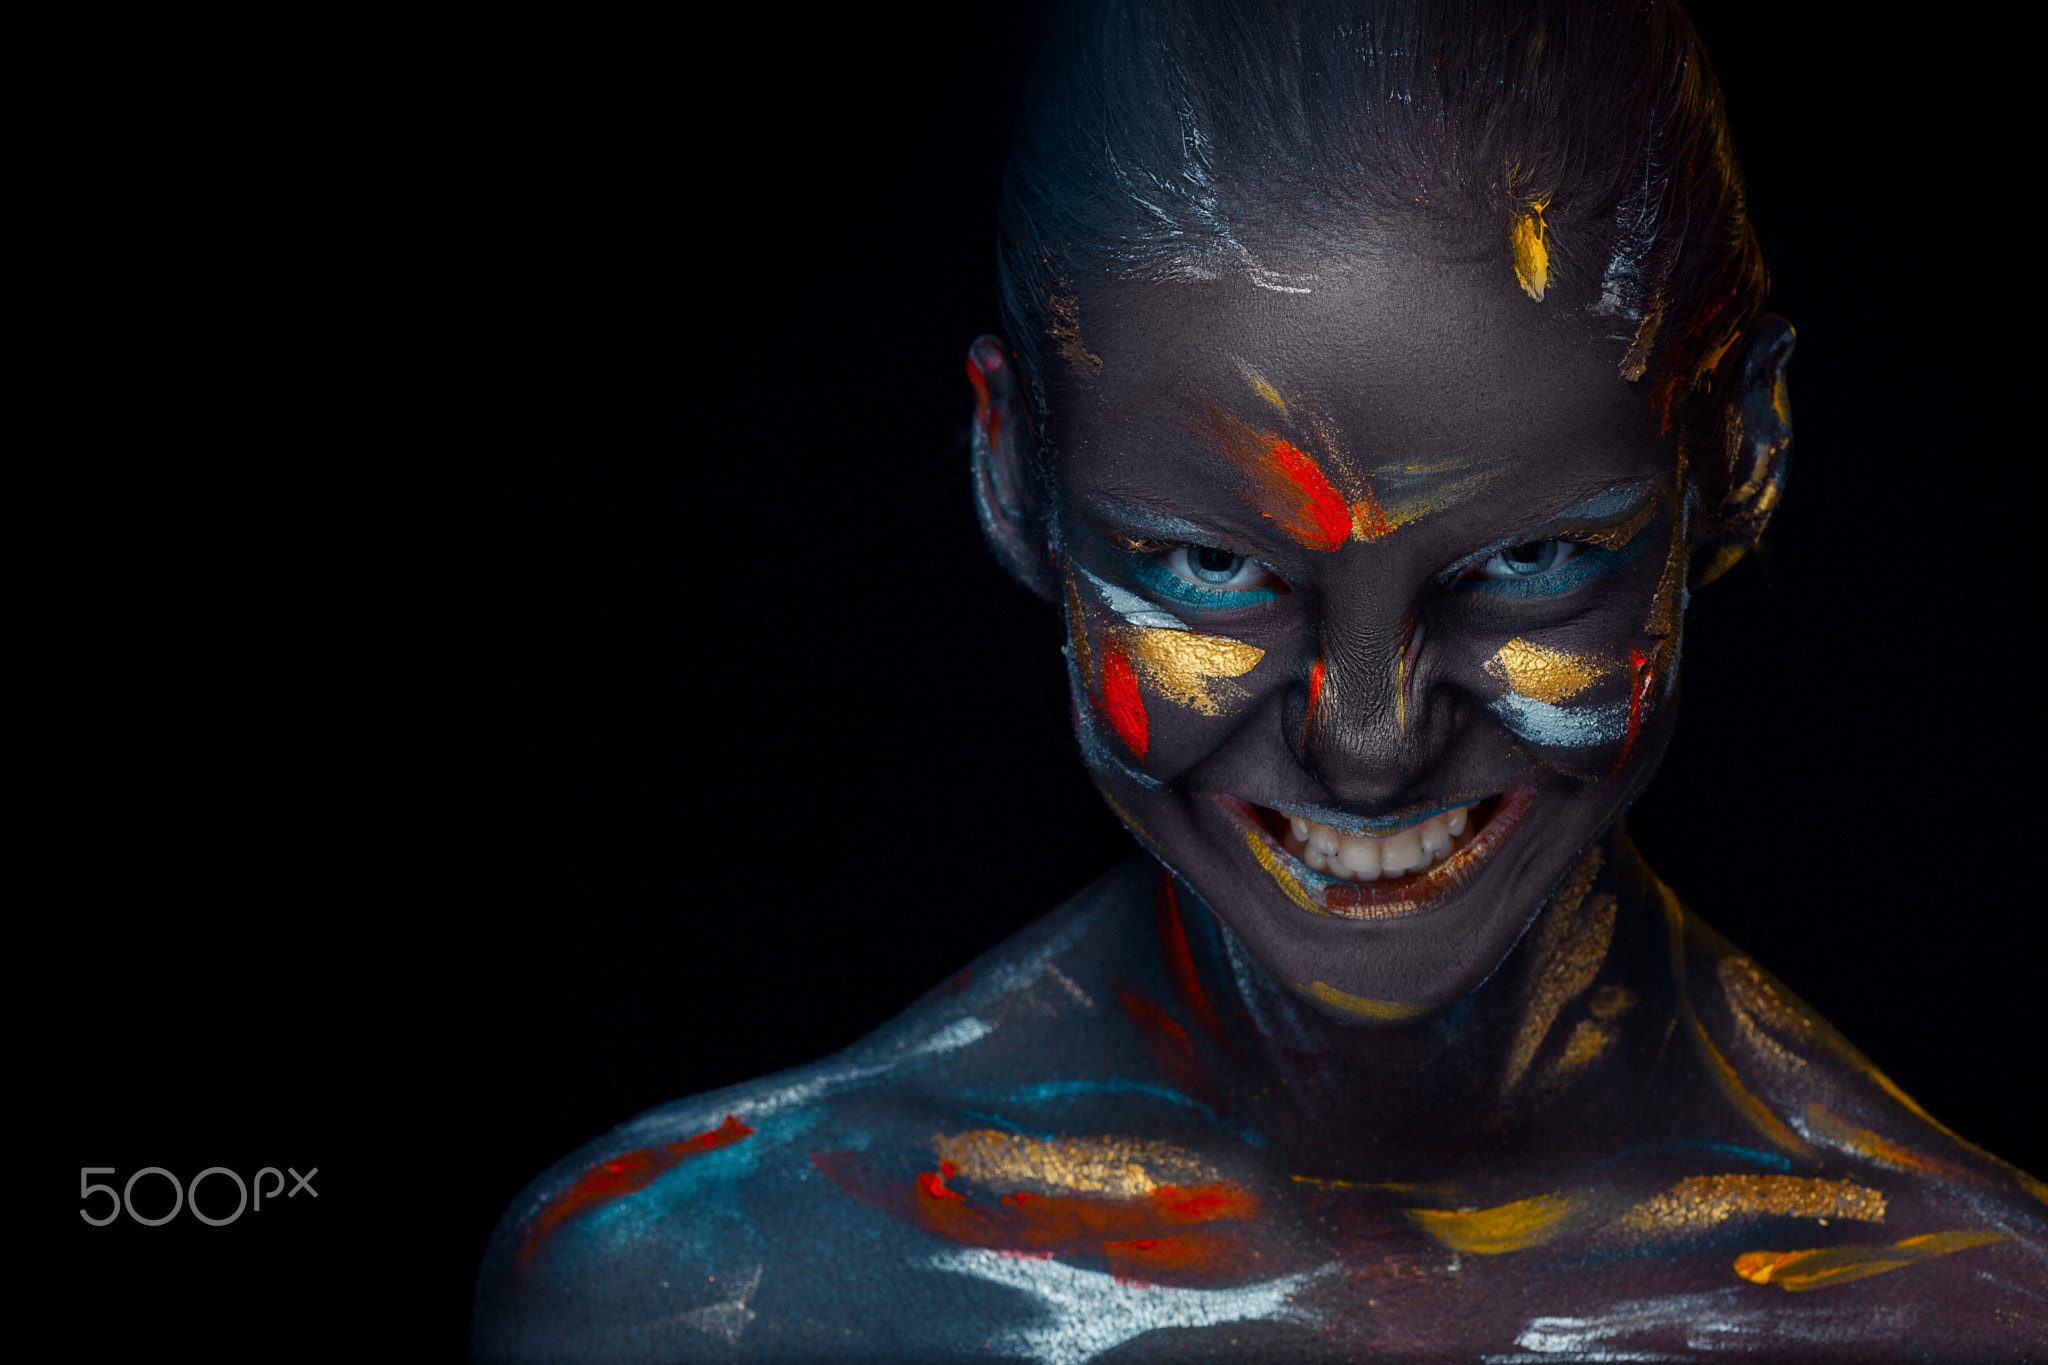 People 2048x1365 Volodymyr Melnyk face teeth colorful dark body paint women watermarked 500px simple background black background